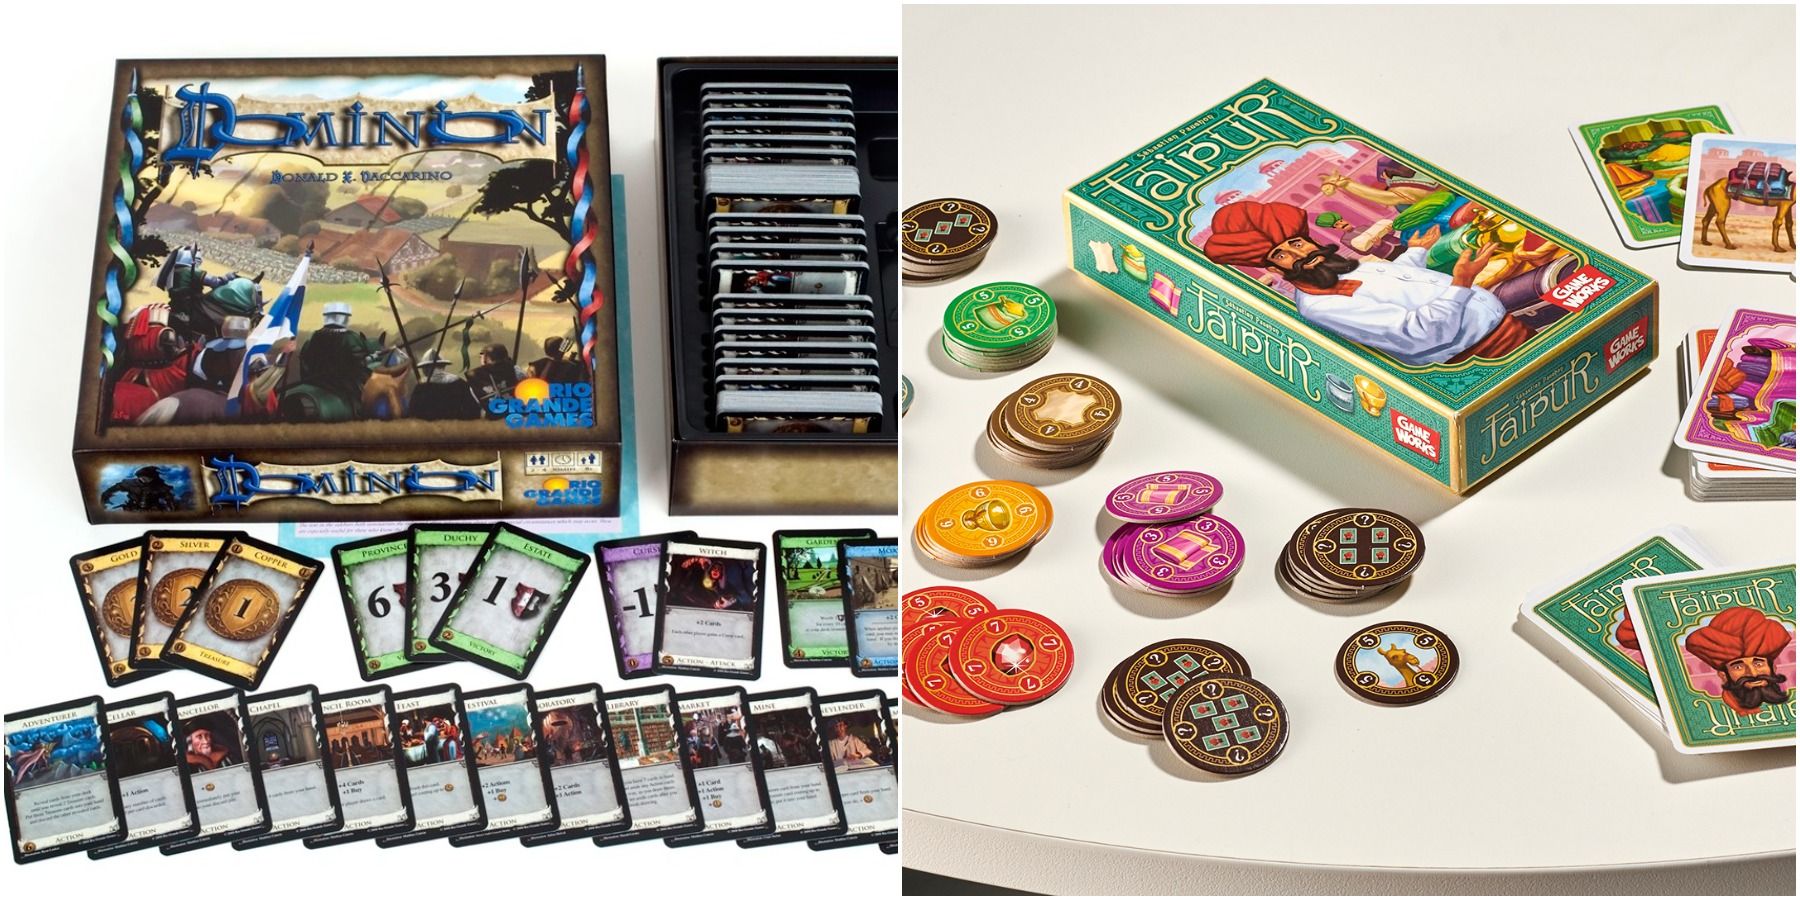 (Left) Dominion box and cards (Right) Jaipur box and components